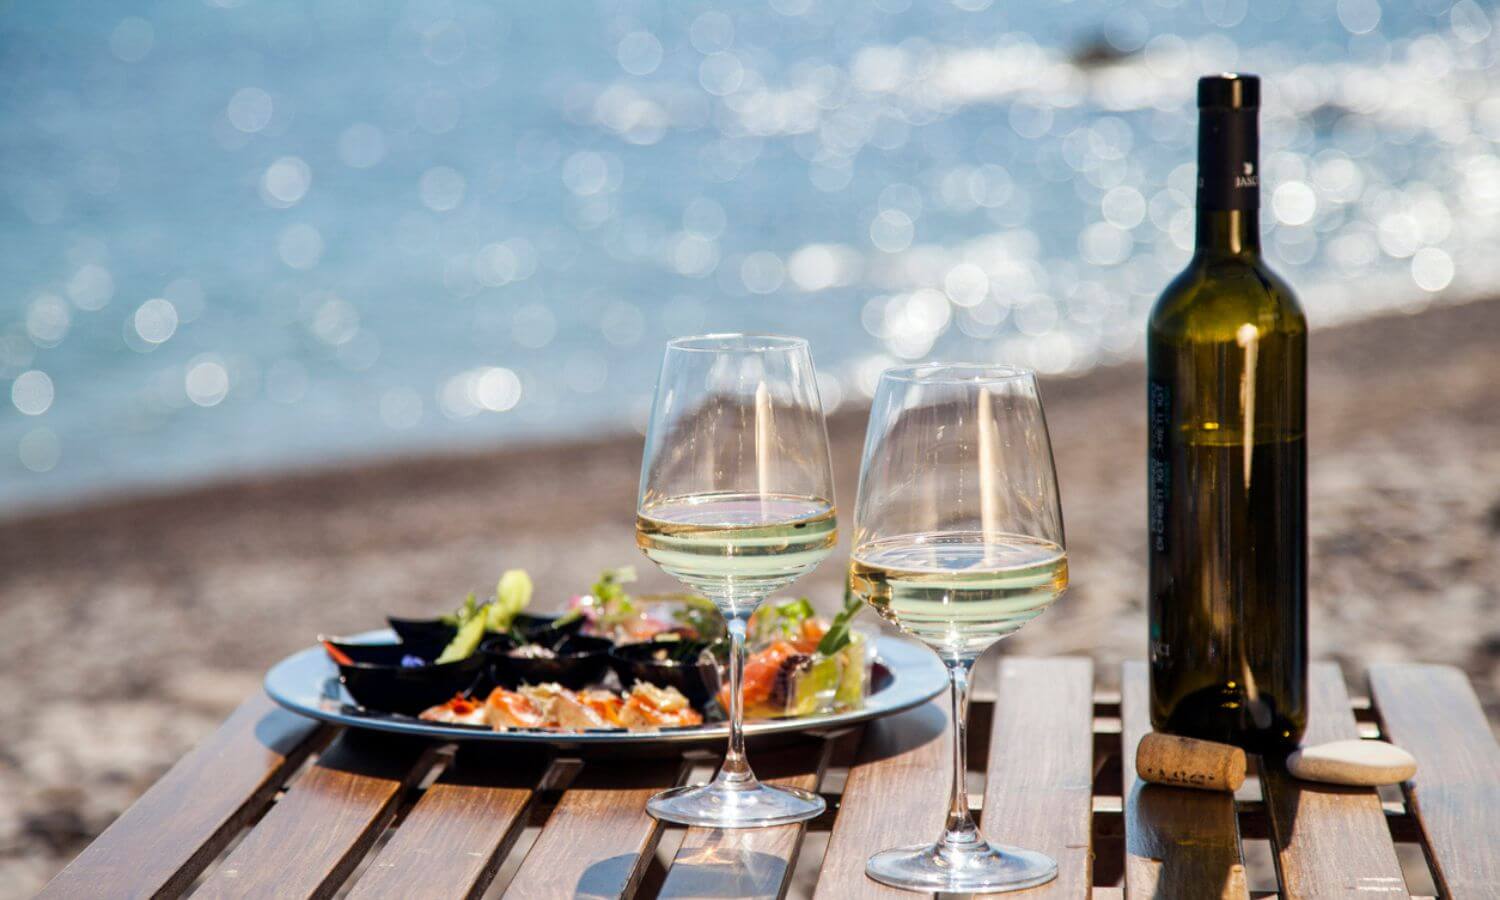 A plate of food and glasses of wine on a table by the ocean at the Festival Gourmet Internacional in Puerto Vallarta